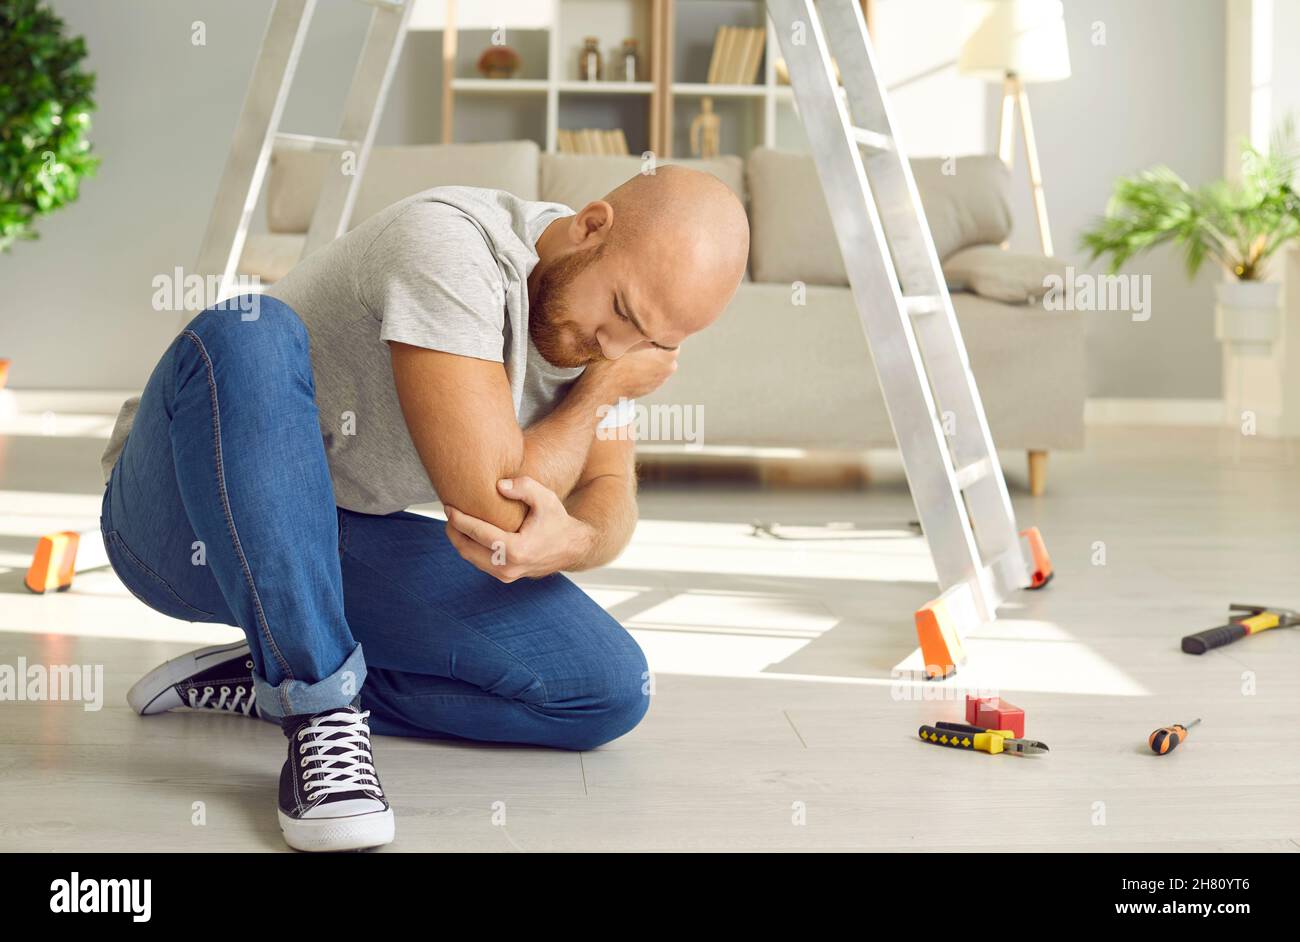 Man who just fell off ladder at home is sitting on floor and touching his hurt elbow Stock Photo